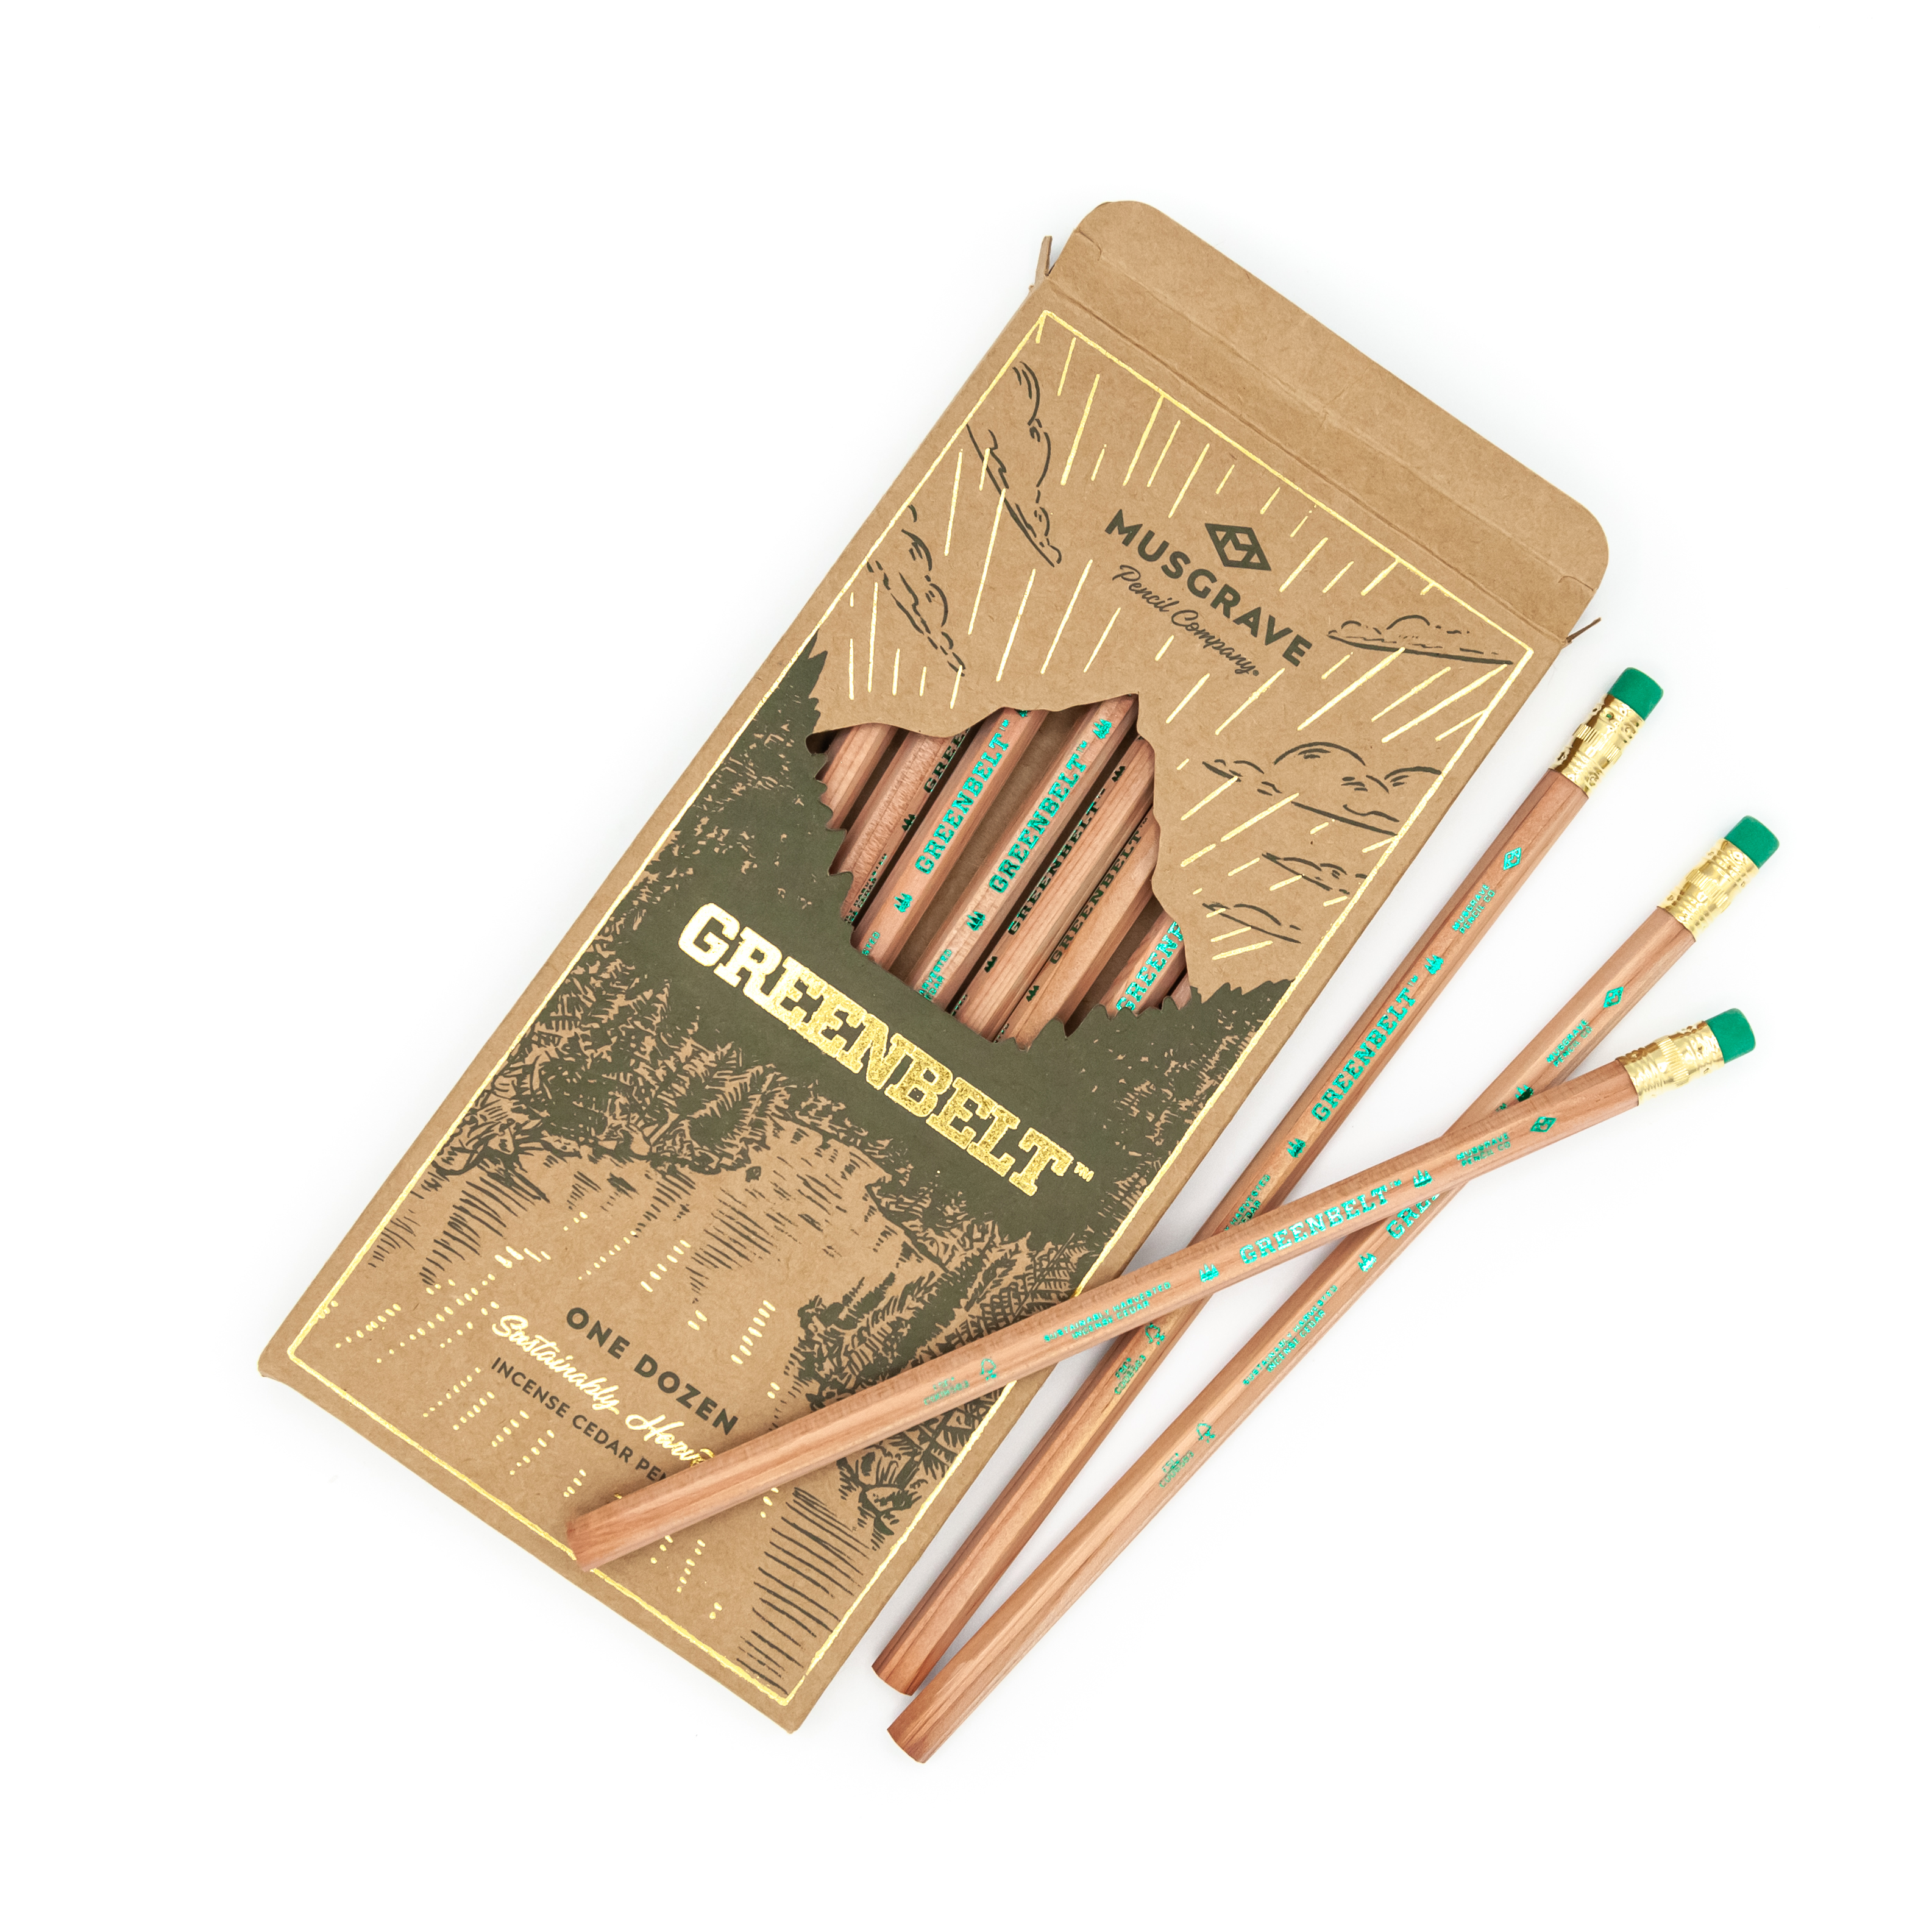 Musgrave Pencil Company Product Image